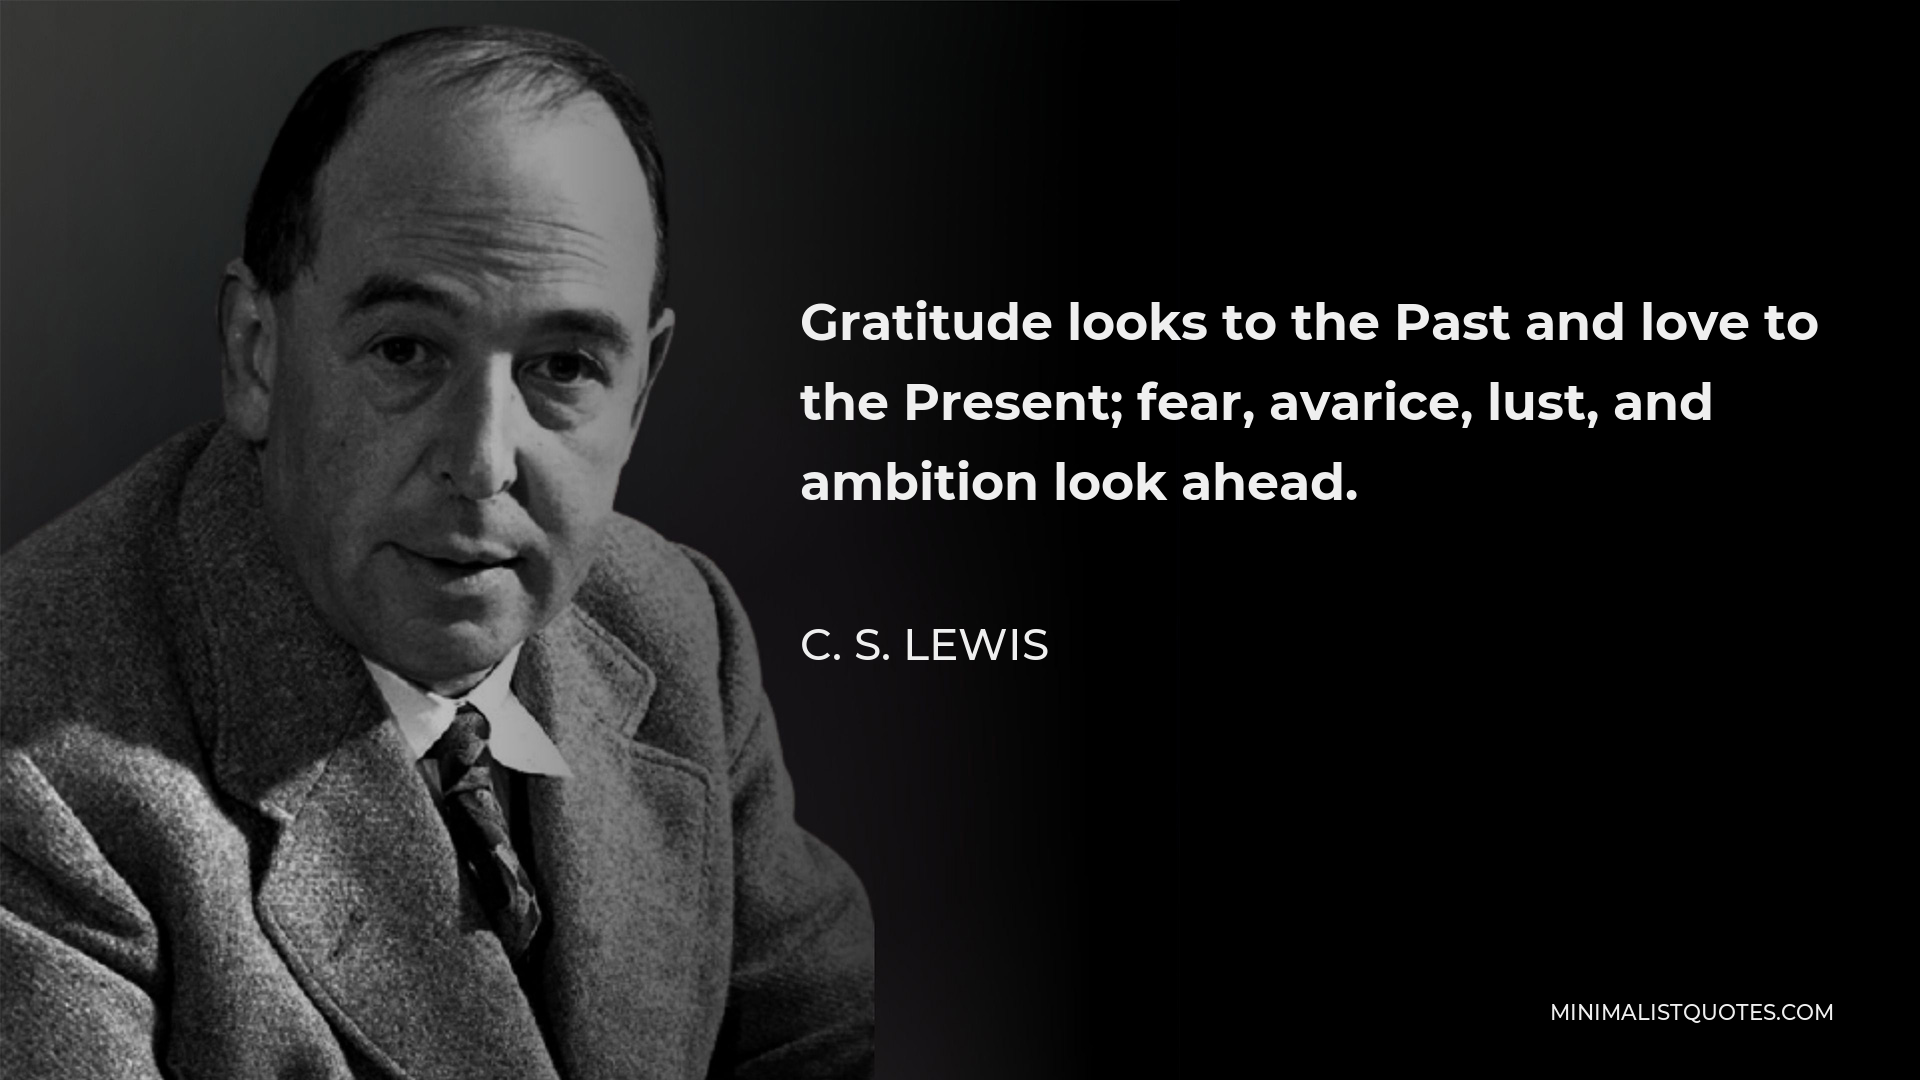 C. S. Lewis Quote - Gratitude looks to the Past and love to the Present; fear, avarice, lust, and ambition look ahead.